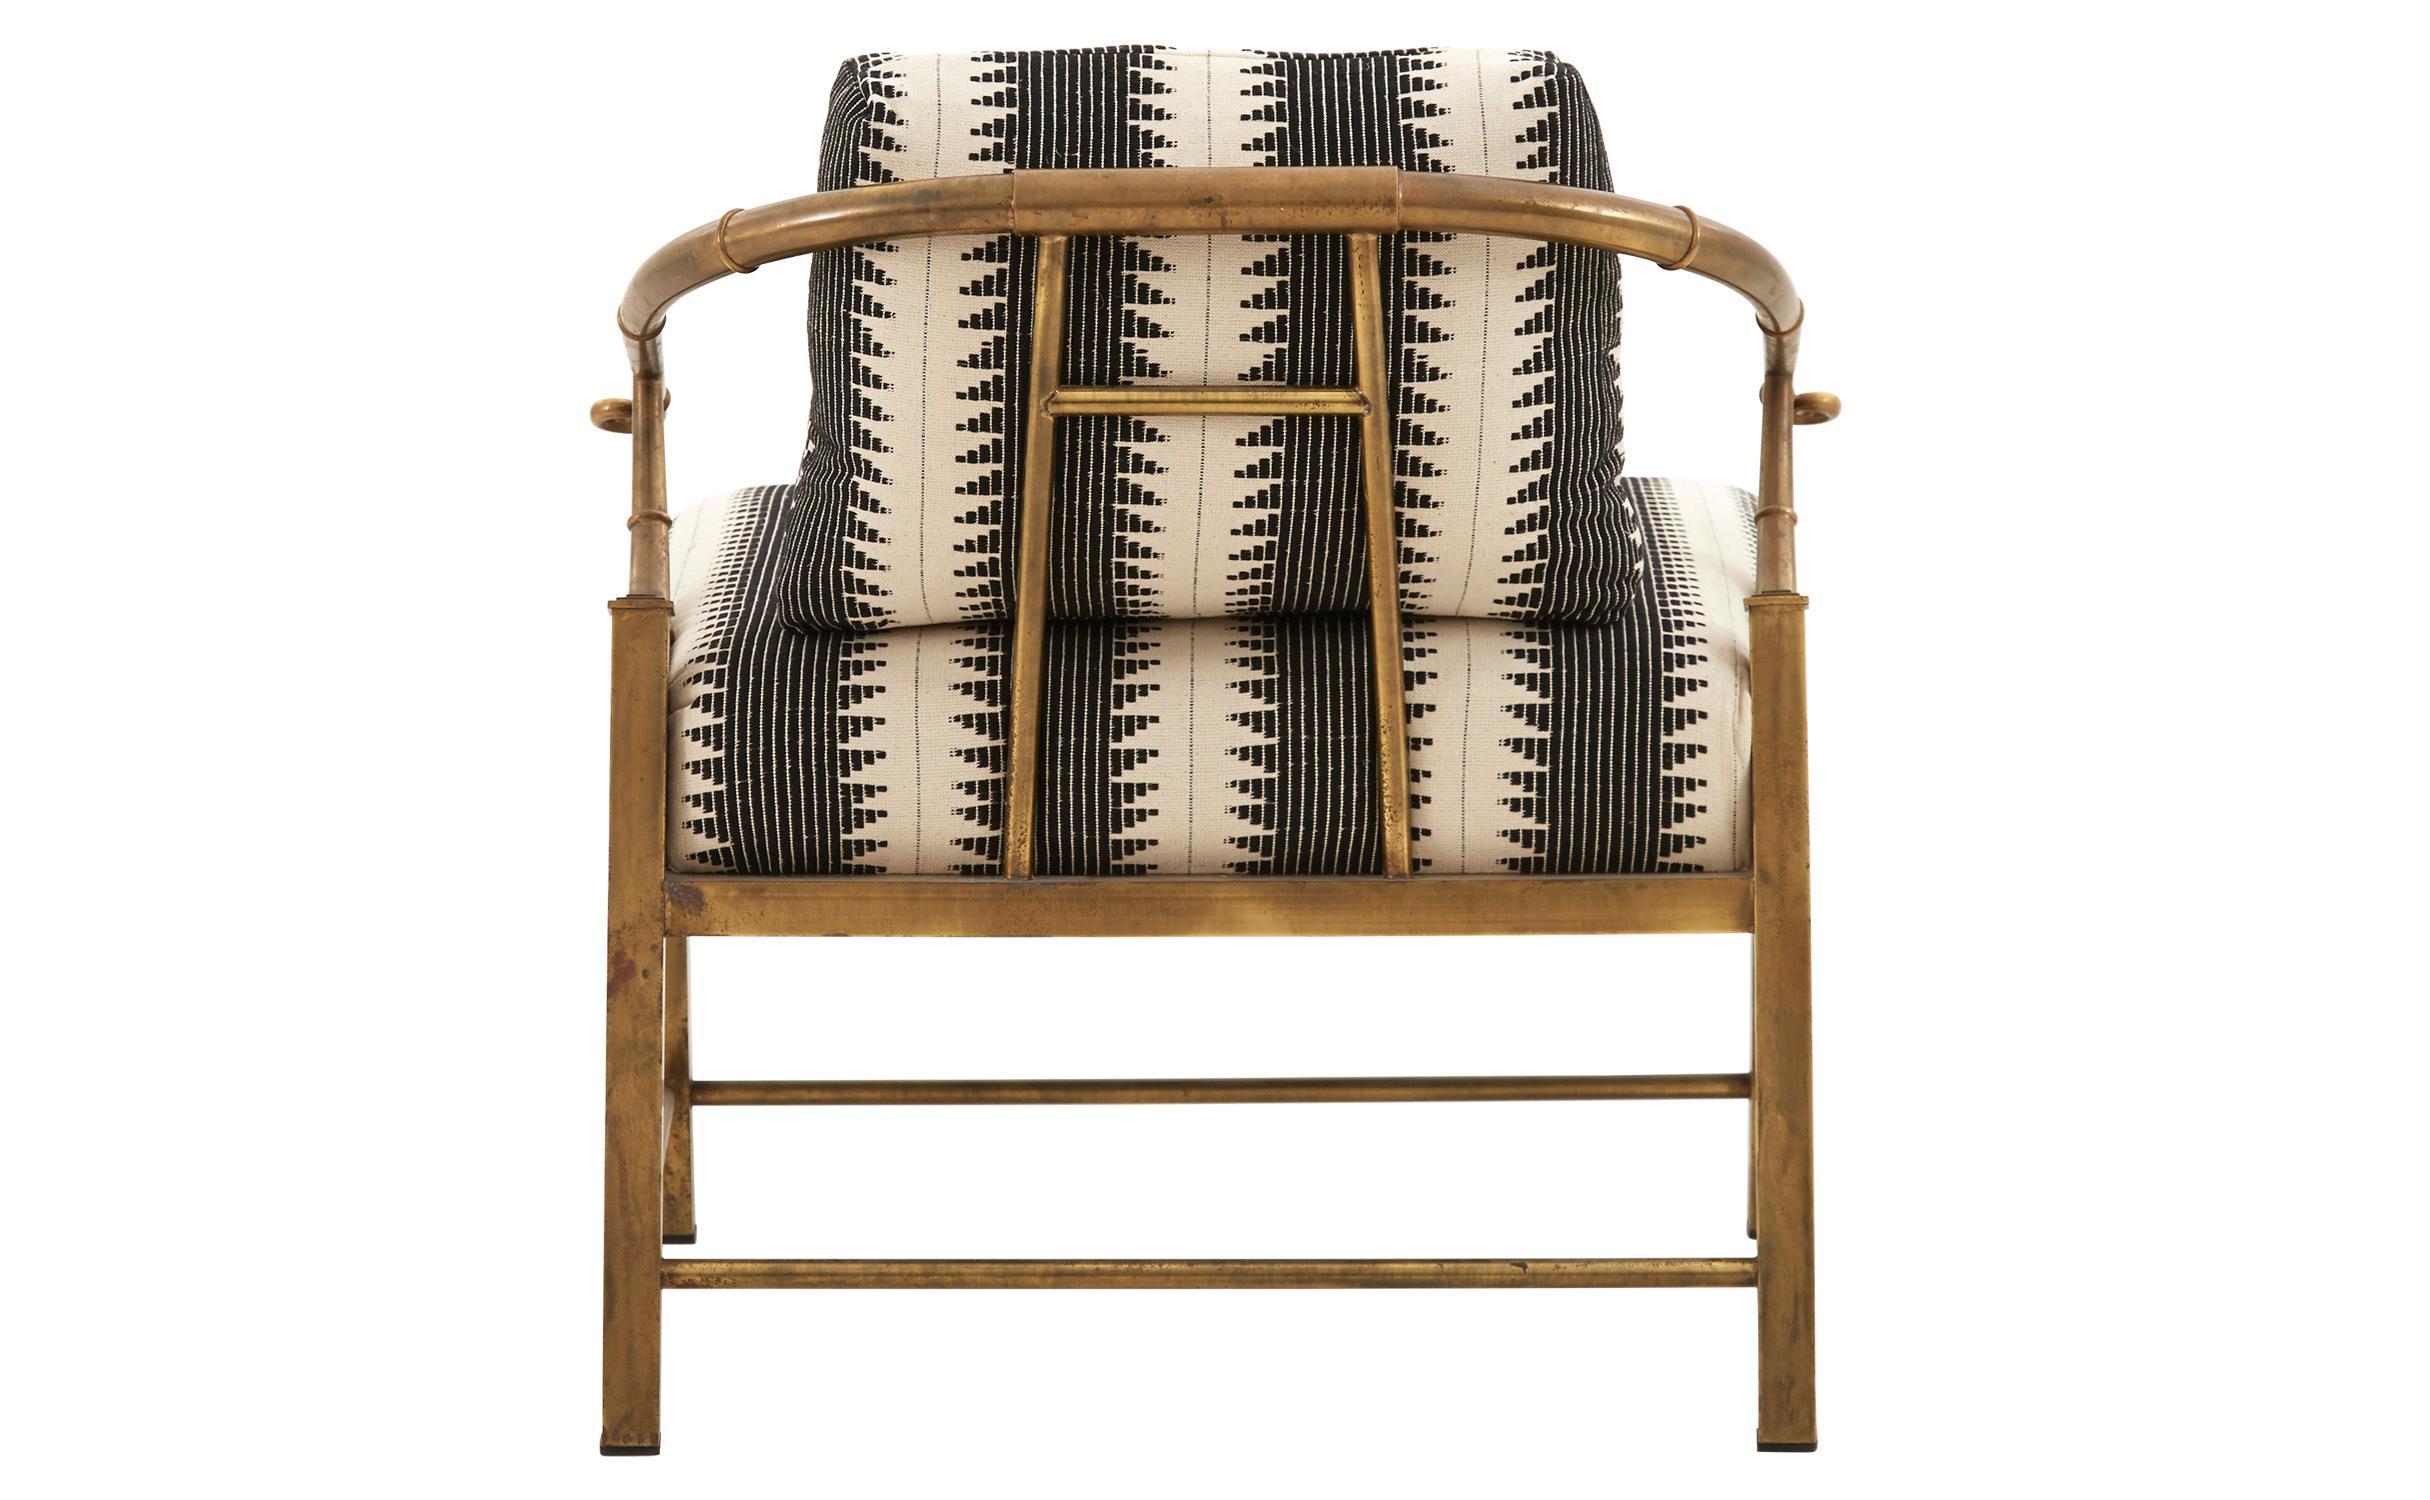 American Chinoiserie Brass Lounge Chair Designed by Charles Pengally for Mastercraft